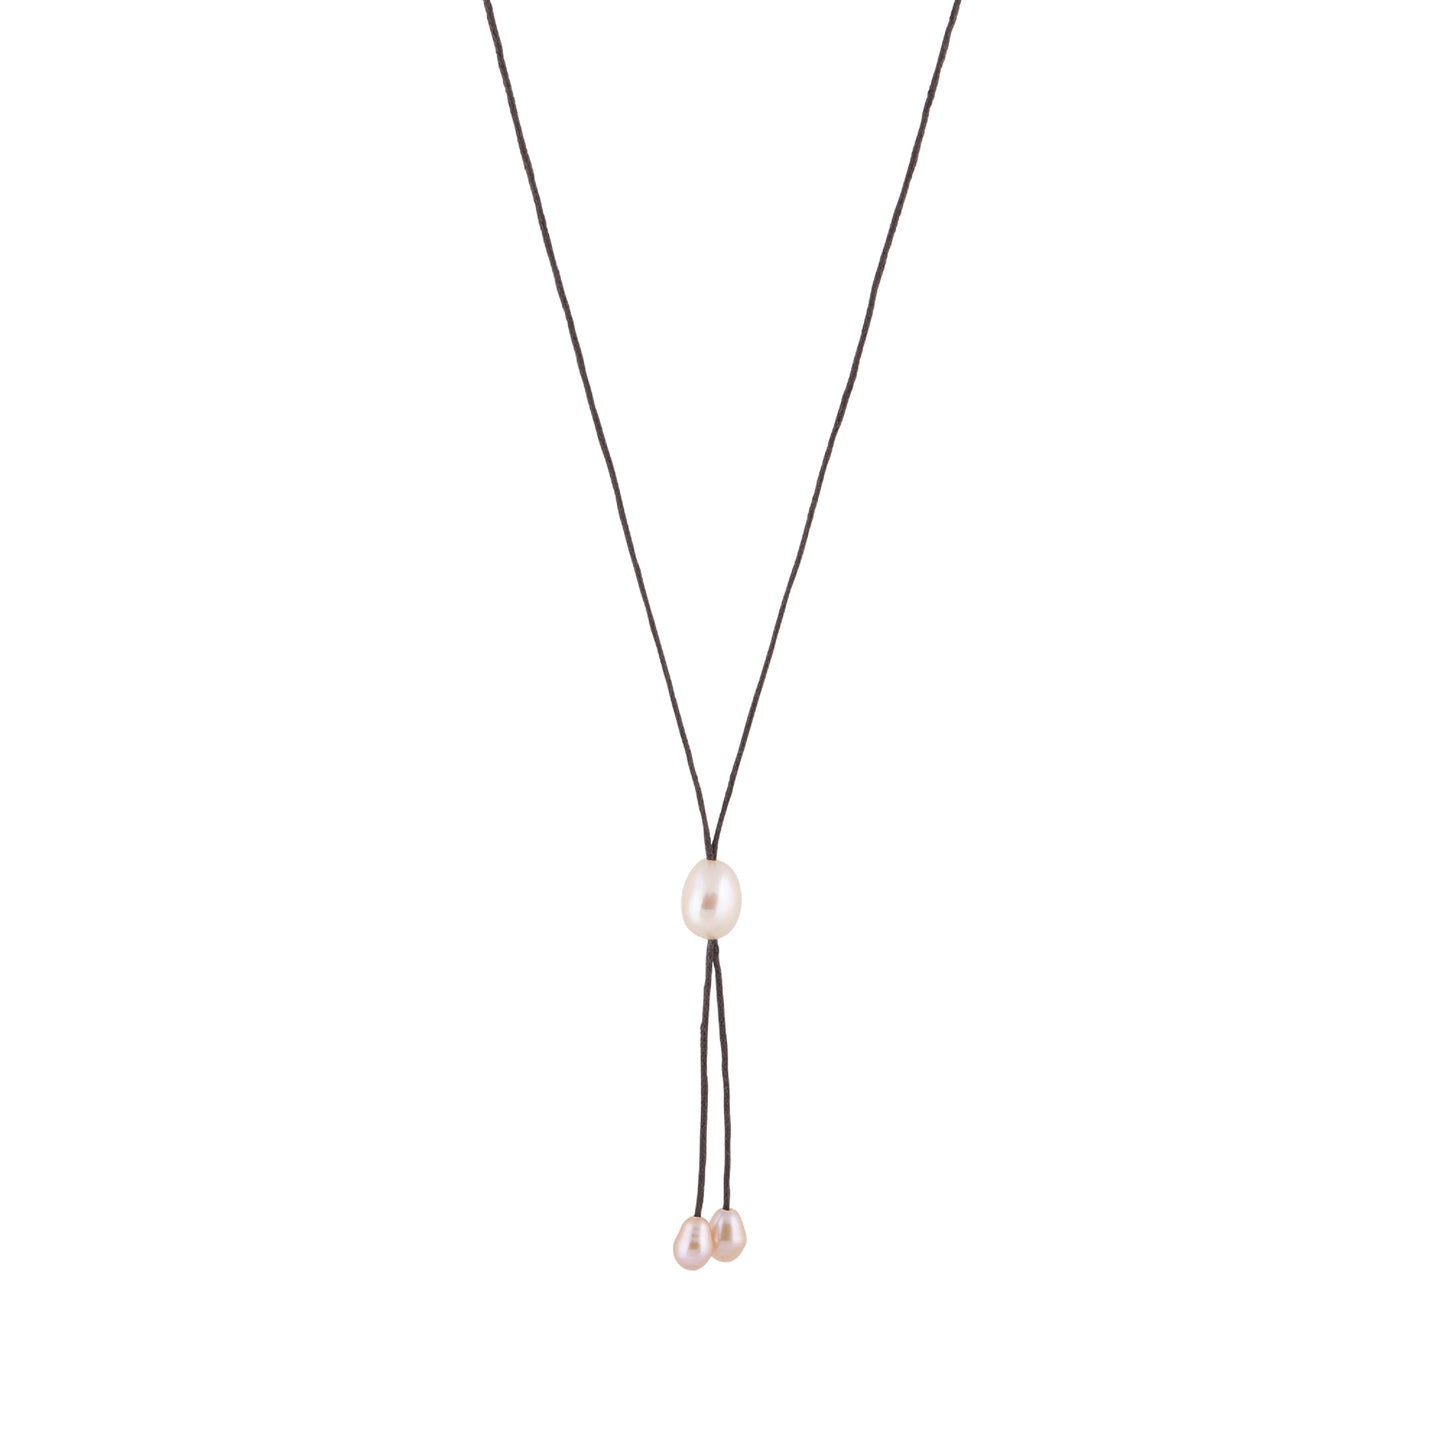 Lily - Freshwater pearl bolo tie (Dark brown strand, natural pearls)